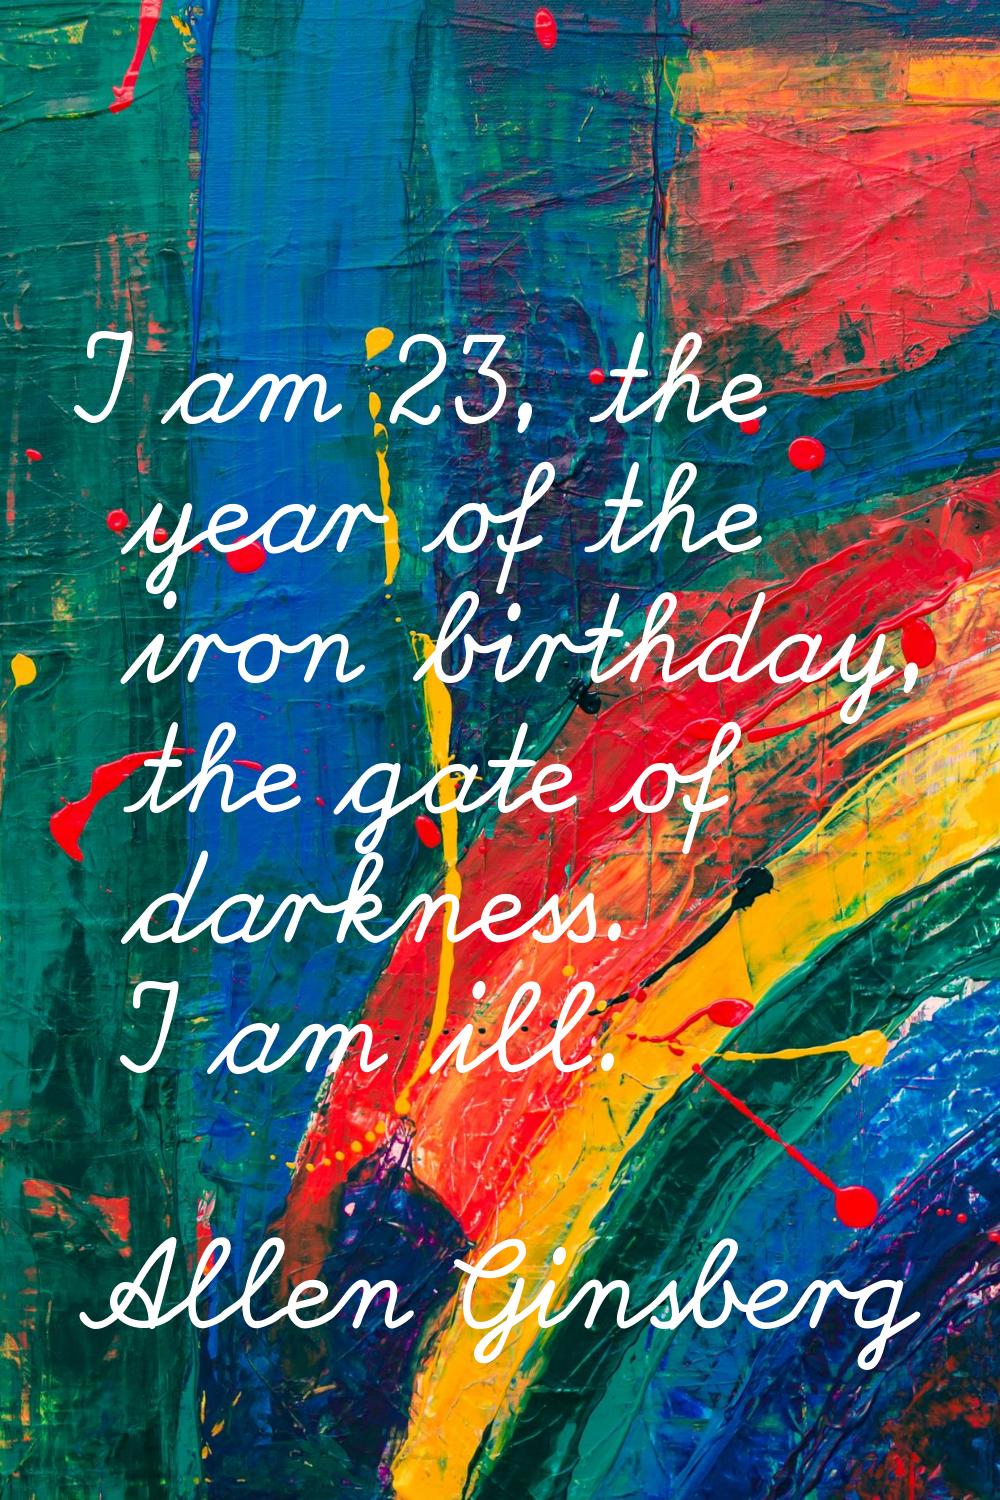 I am 23, the year of the iron birthday, the gate of darkness. I am ill.